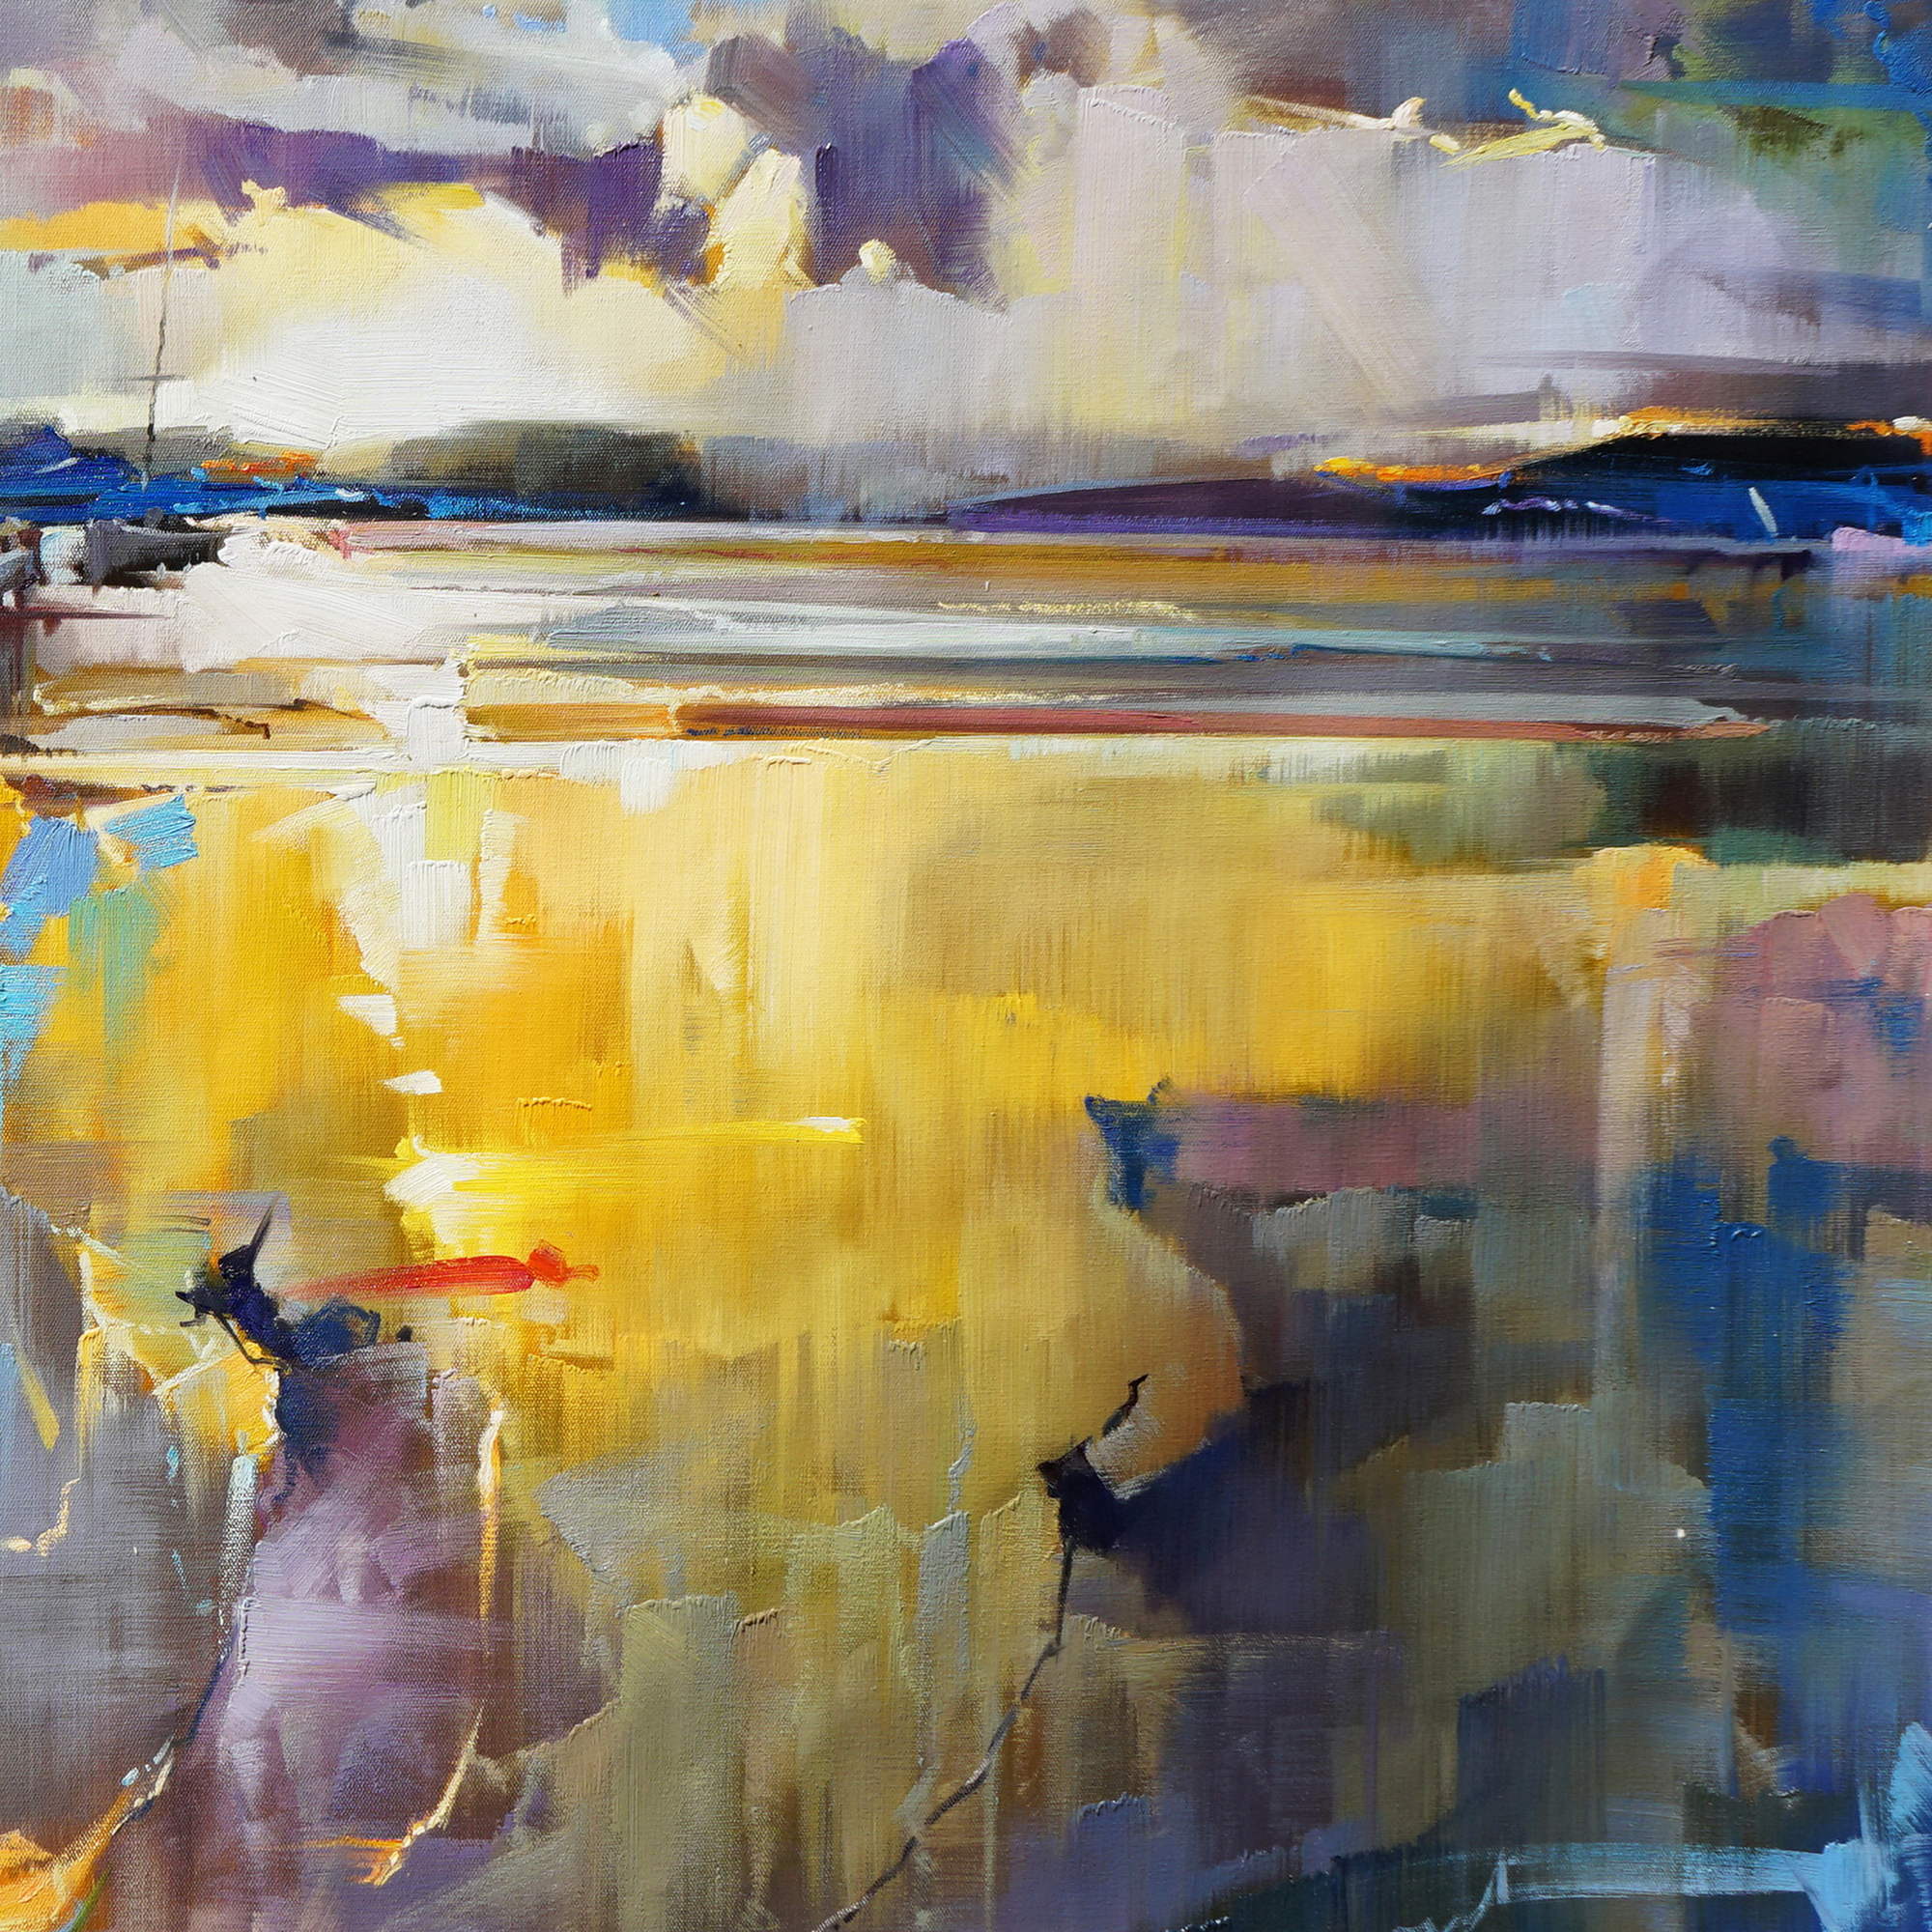 Hand painted Abstract Landscape Marina at sunset 120x180cm